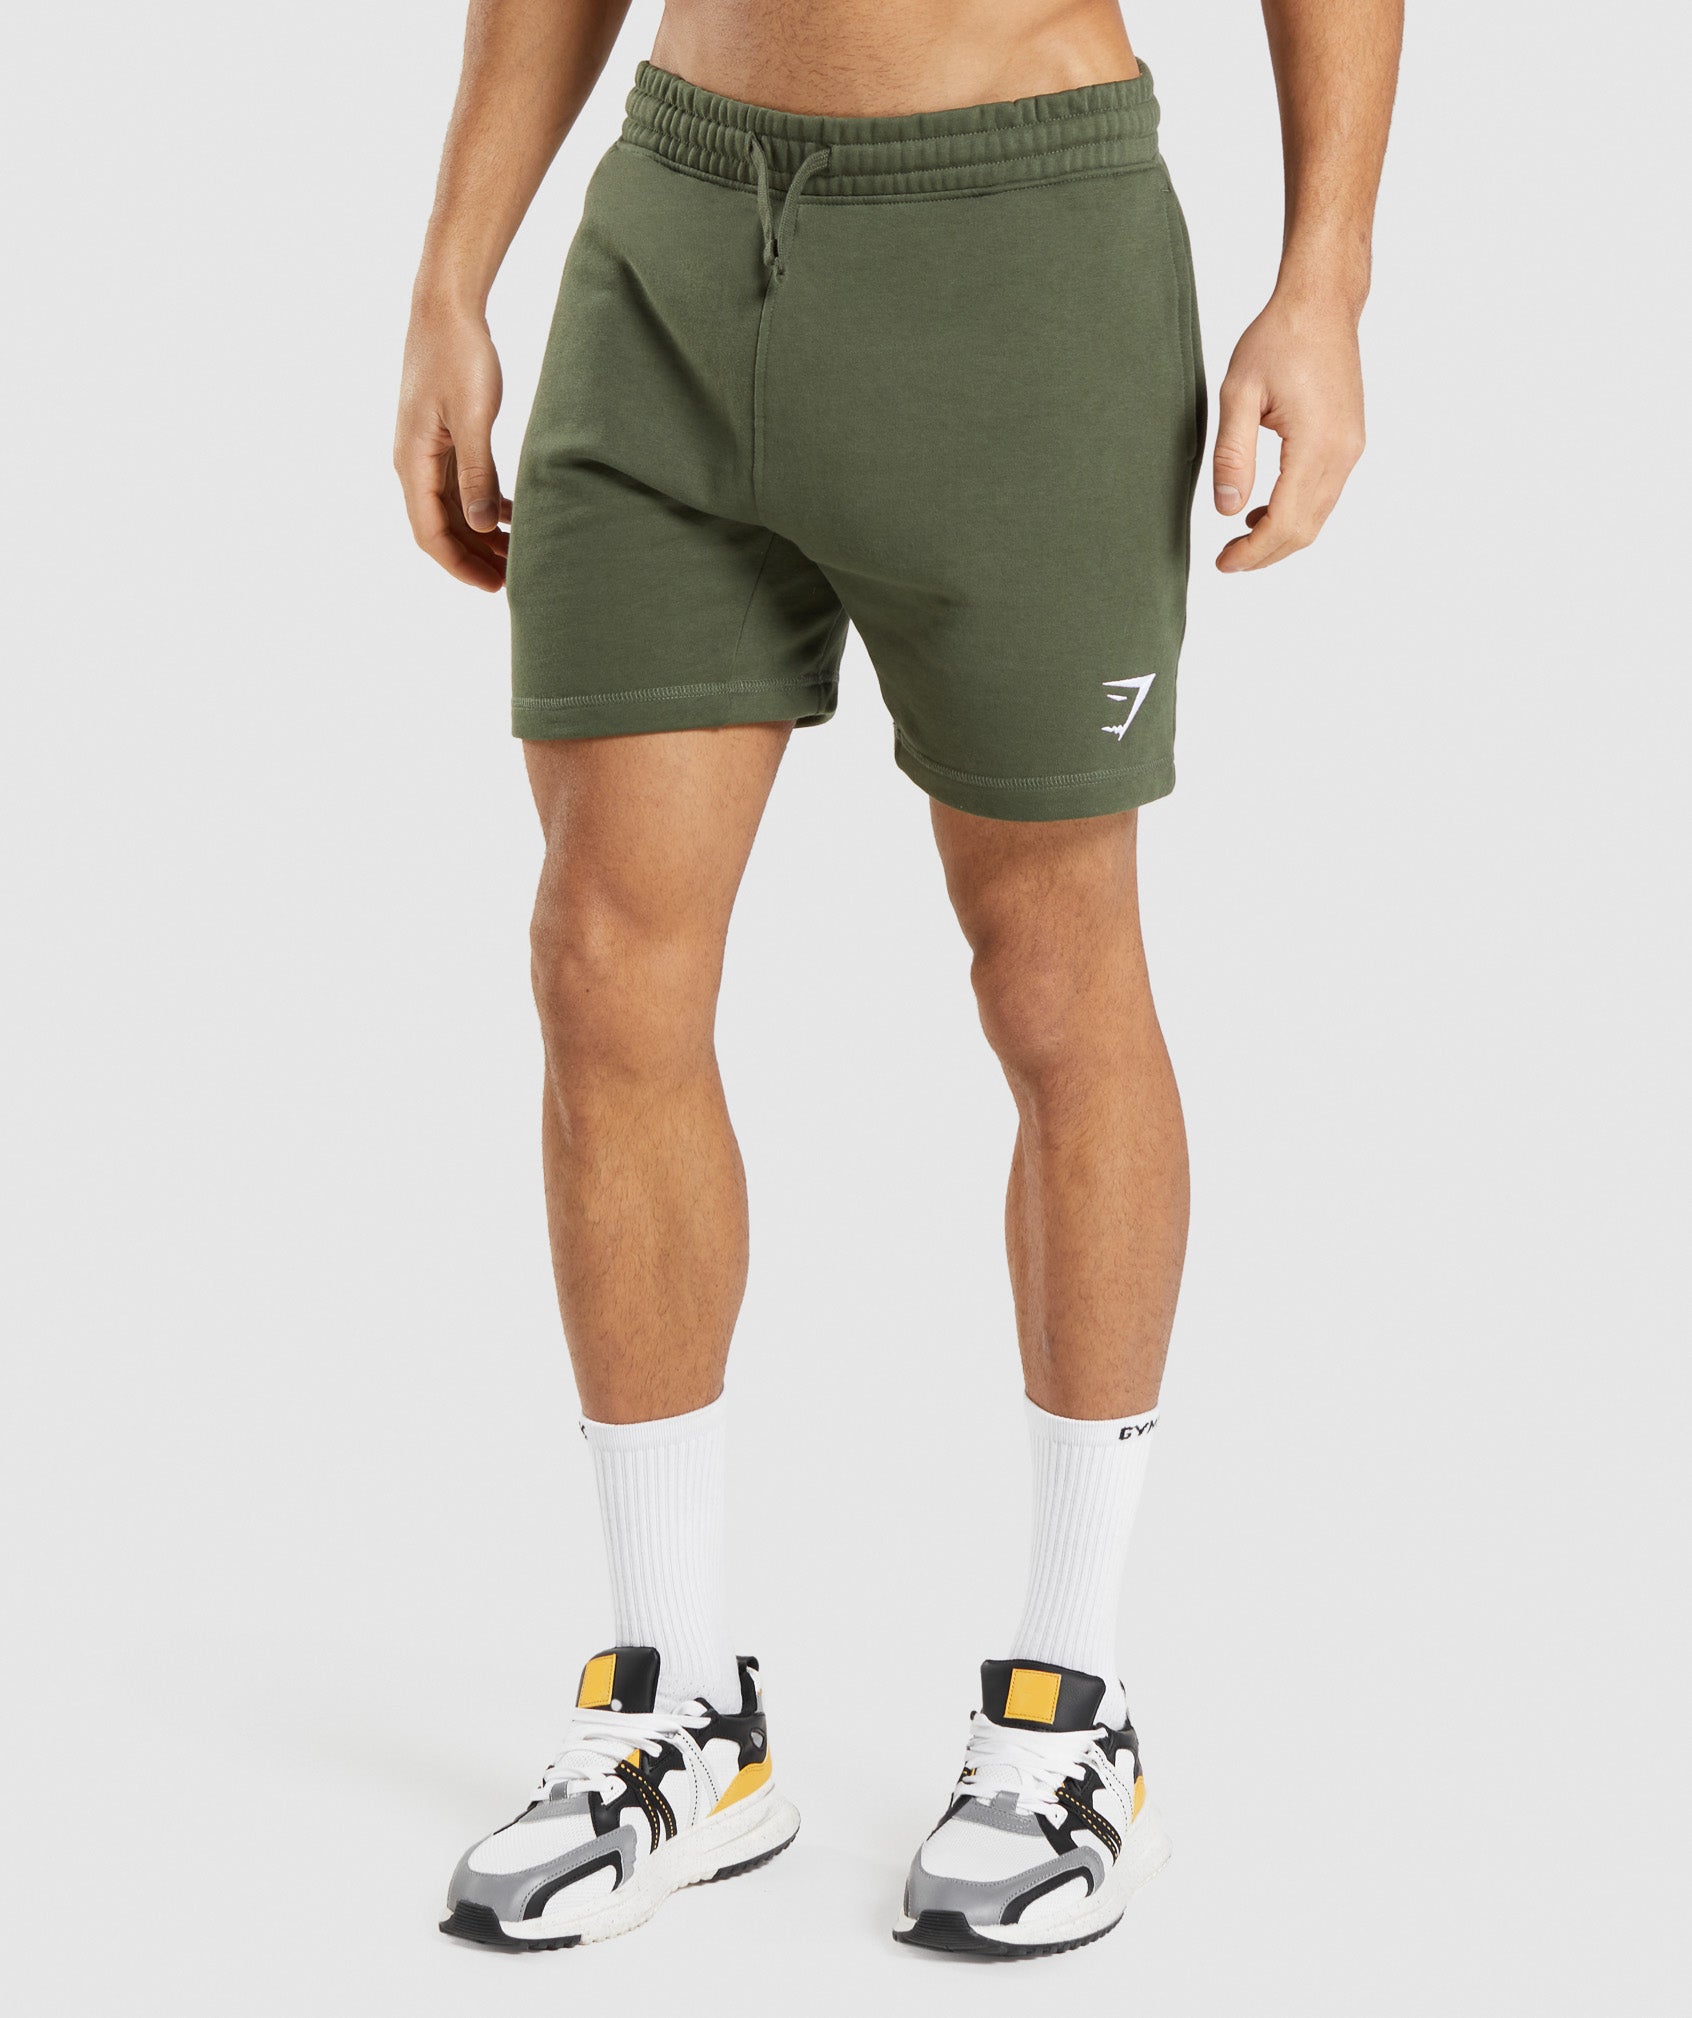 Crest 7" Shorts in Core Olive